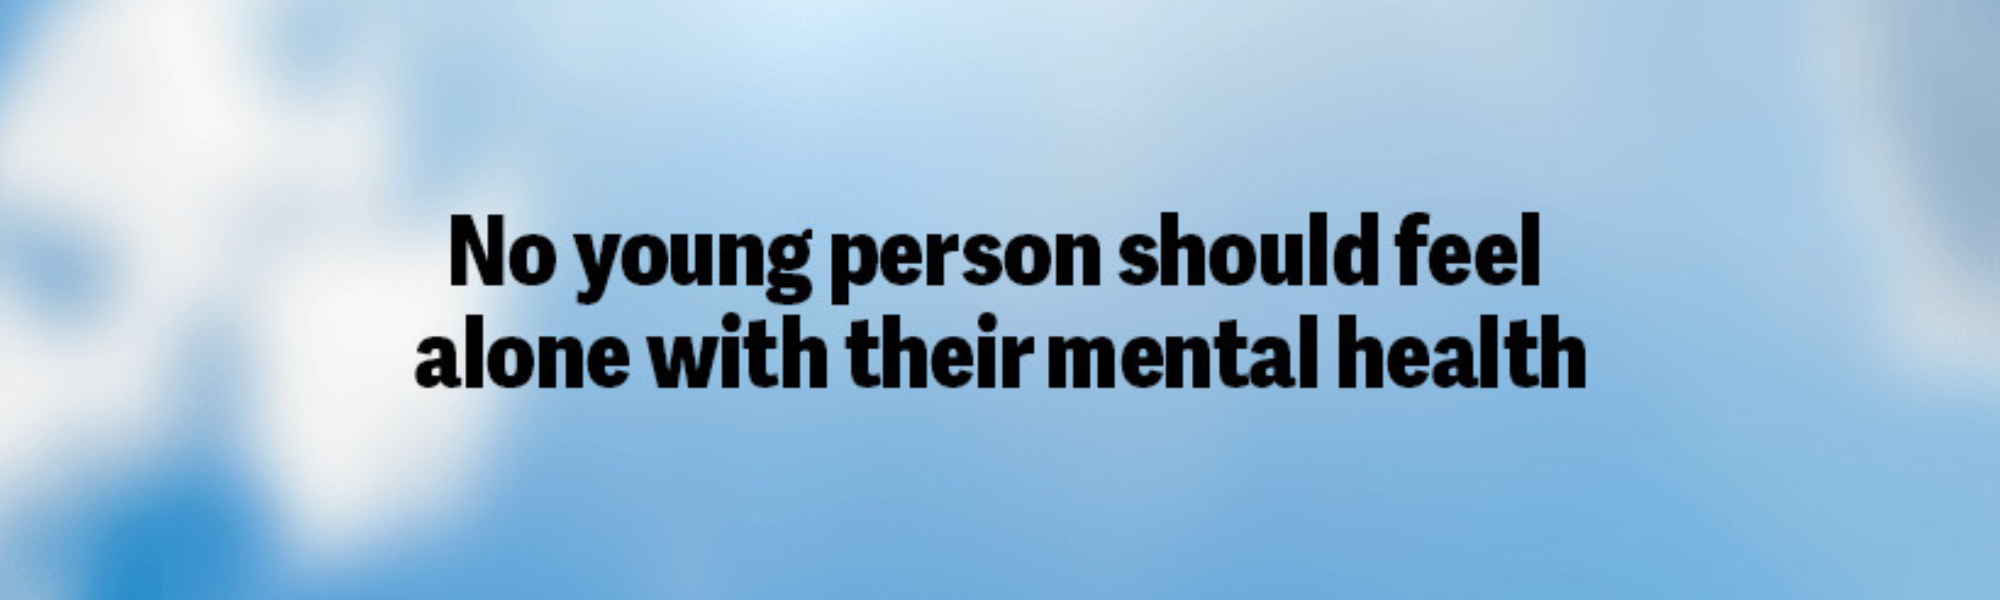 No young person should feel alone with their mental health